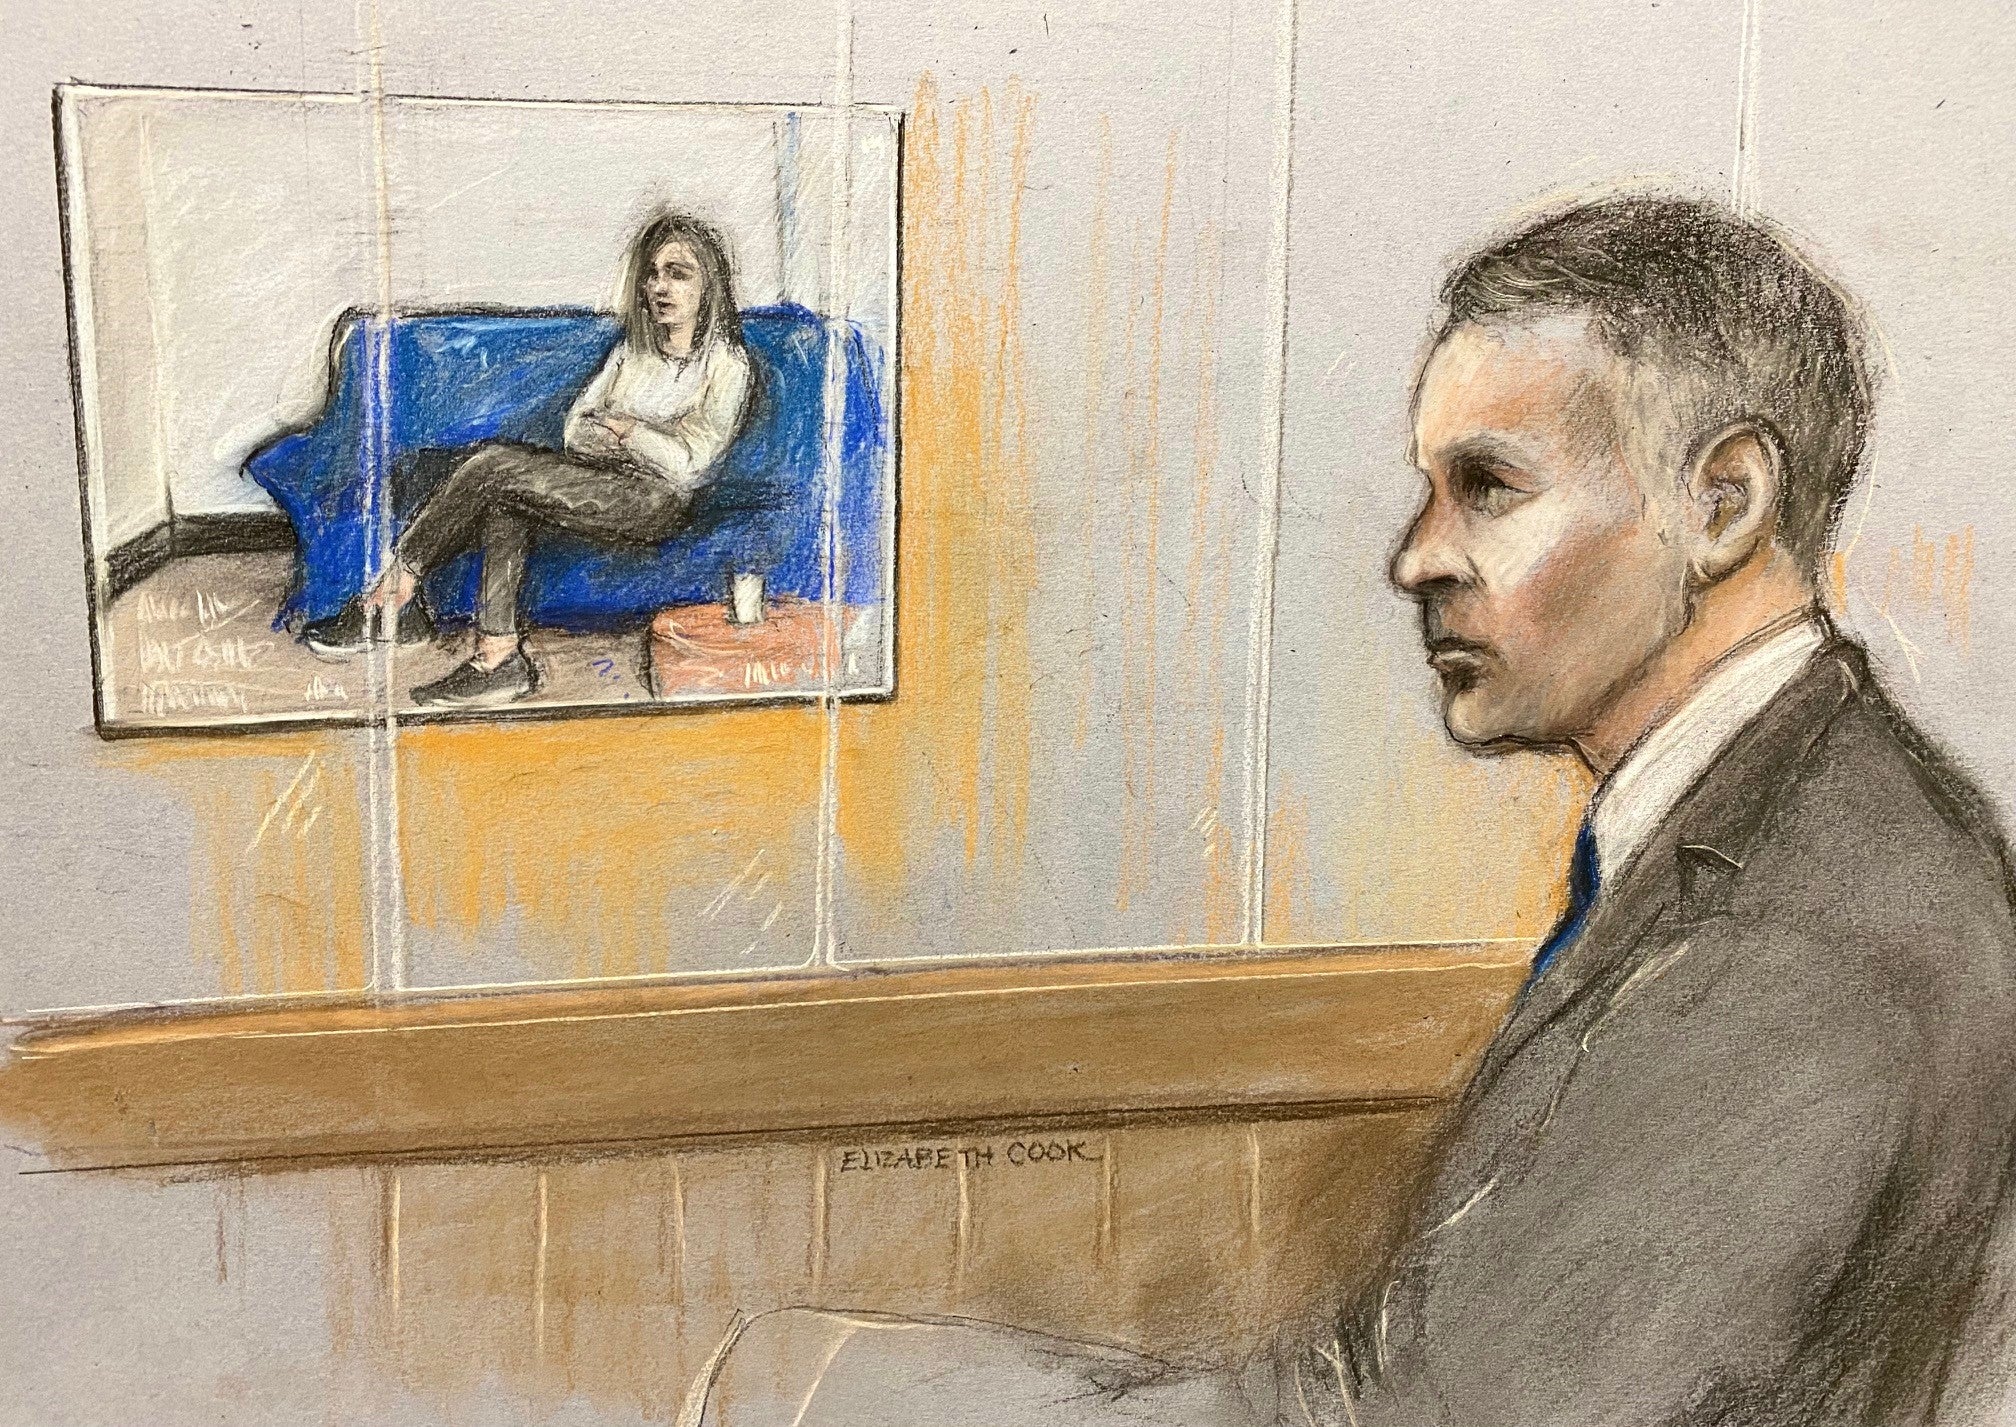 A court artist sketch drawn last week shows Ryan Giggs watching ex-girlfriend Kate Greville giving evidence to police